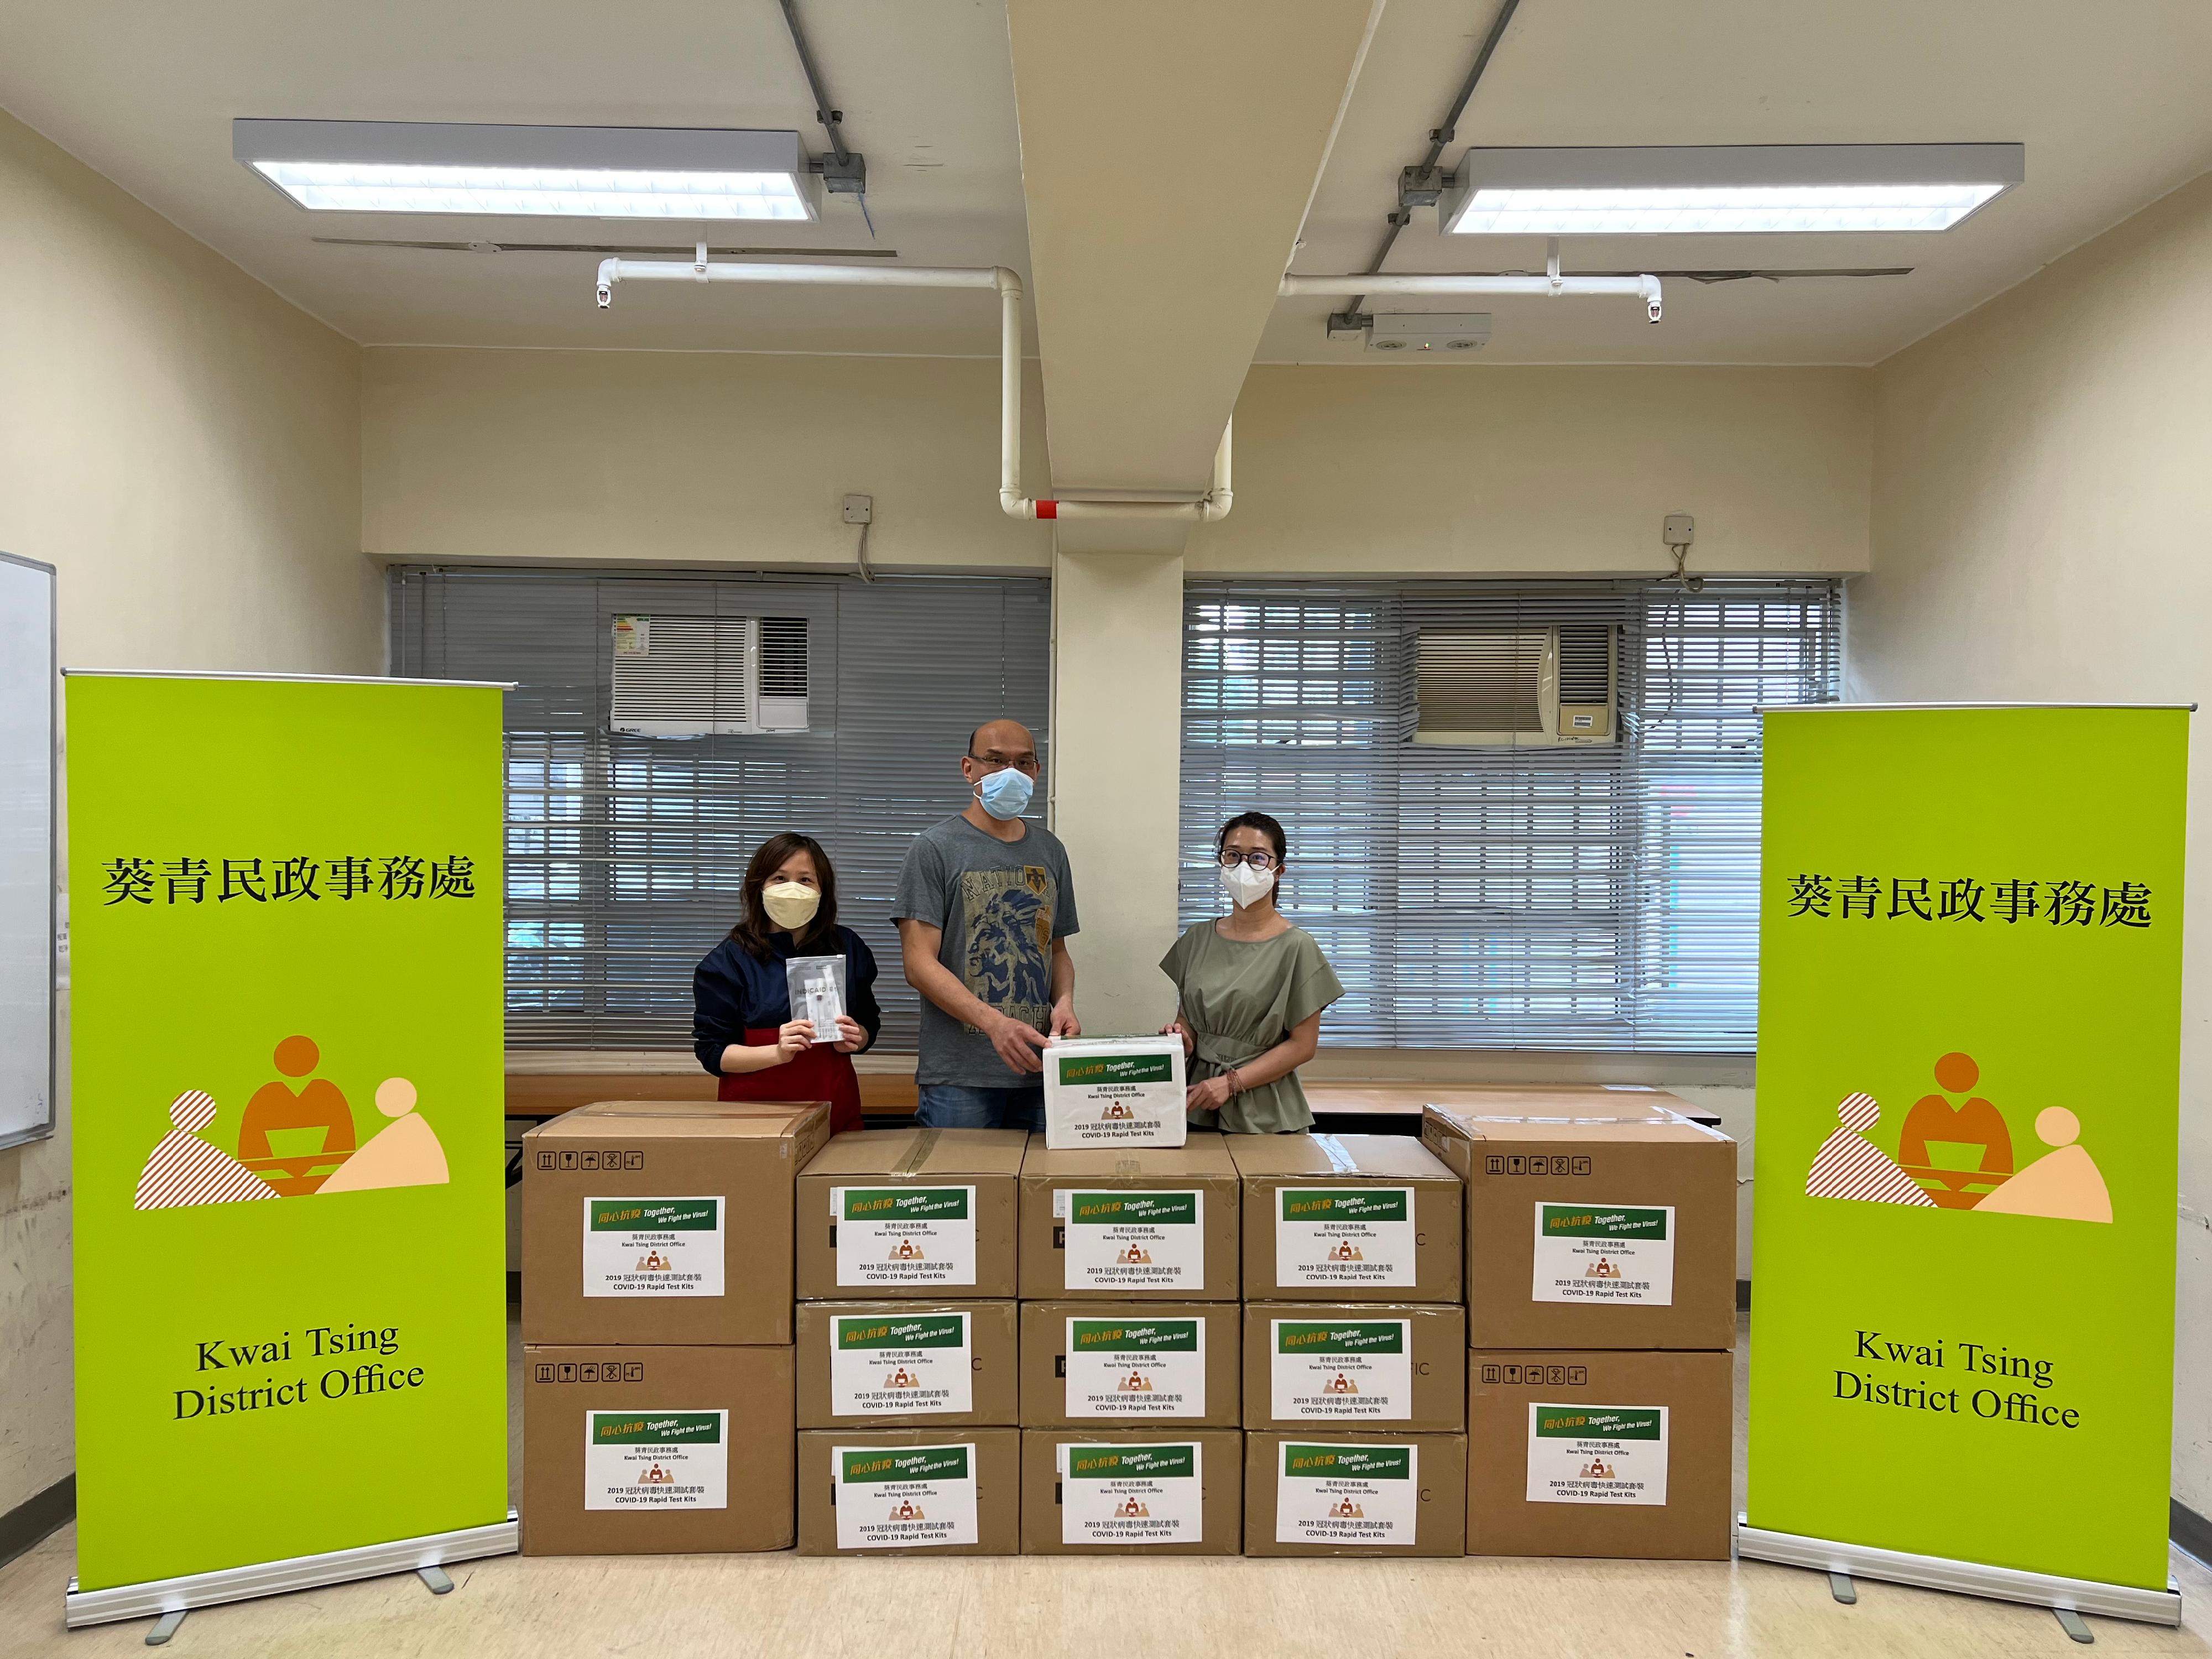 The Kwai Tsing District Office today (March 21) distributed COVID-19 rapid test kits to households, cleansing workers and property management staff living and working in Cheung Hong Estate for voluntary testing through the property management company.